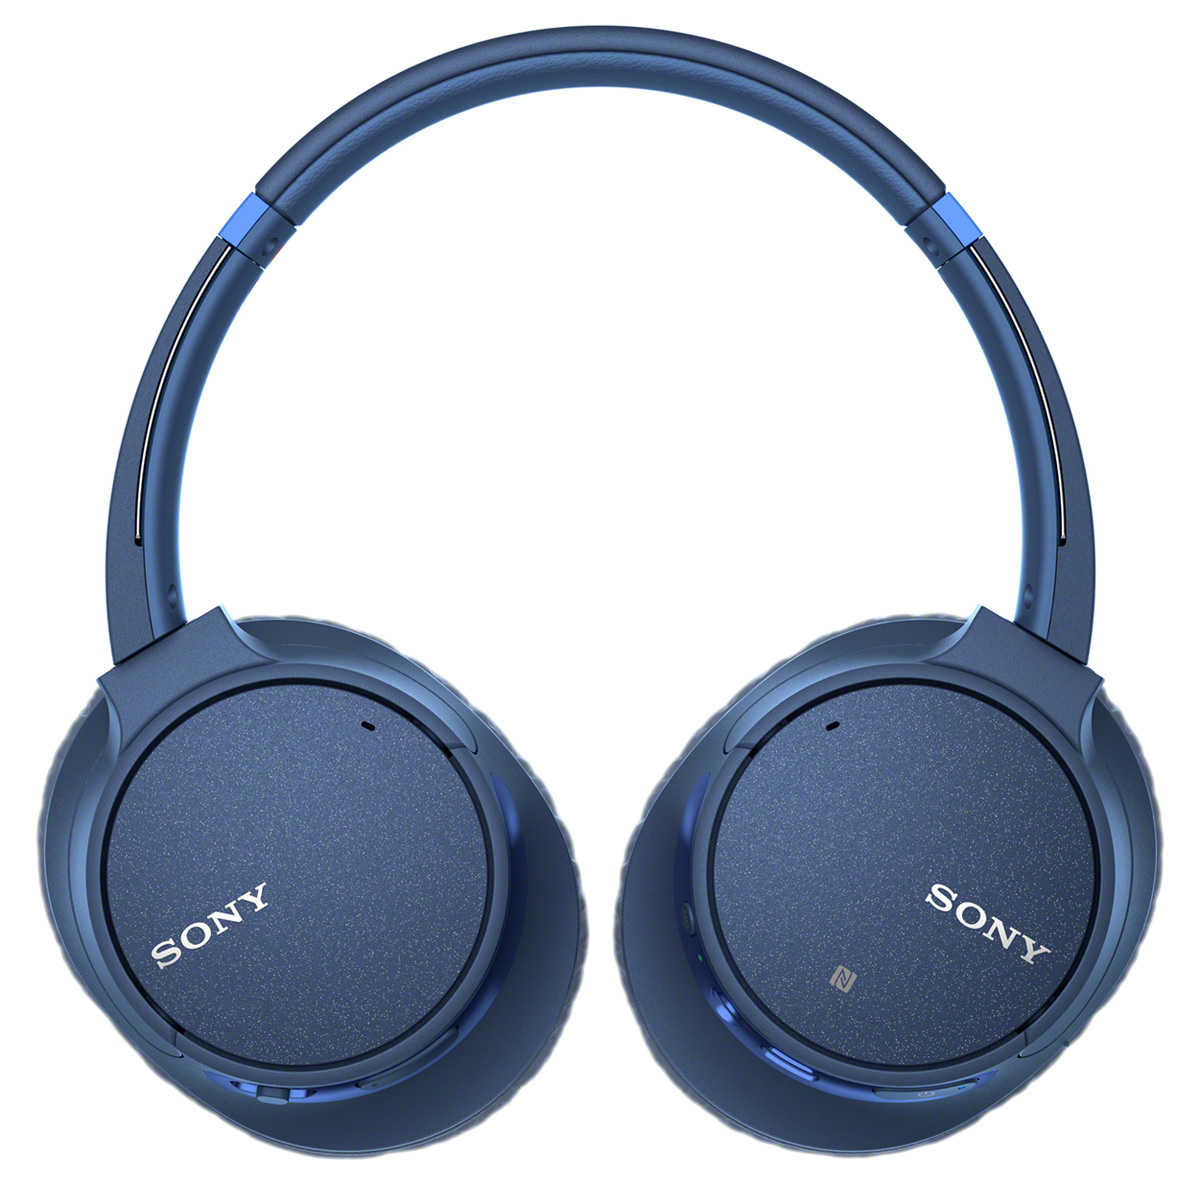 Sony WH-CH700N Wireless Noise-Canceling Over-Ear Headphones (Blue) - image 4 of 4